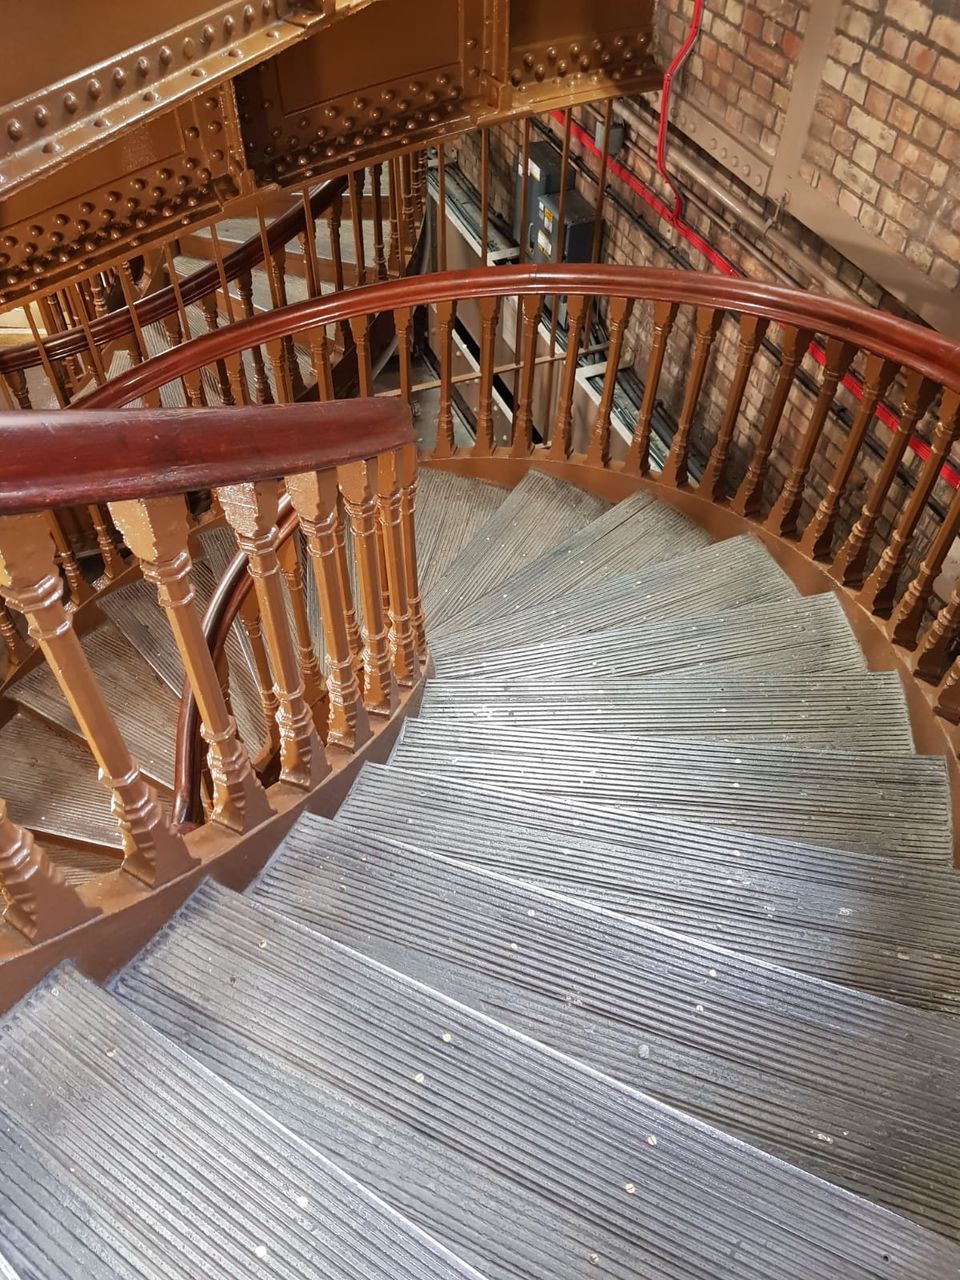 HIGH ANGLE VIEW OF SPIRAL STAIRCASE IN WAREHOUSE